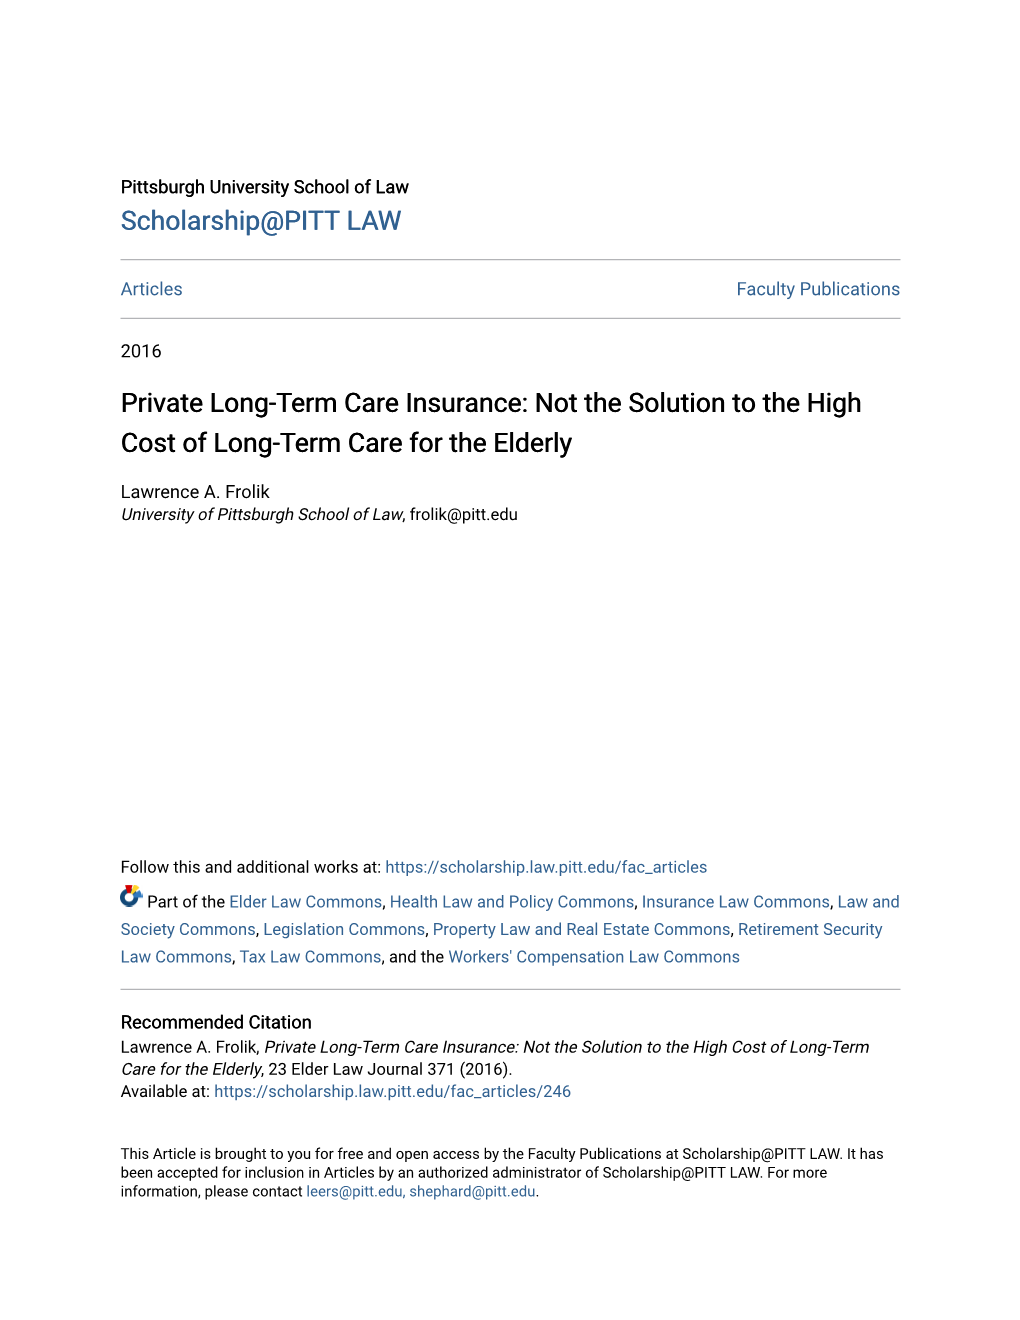 Private Long-Term Care Insurance: Not the Solution to the High Cost of Long-Term Care for the Elderly